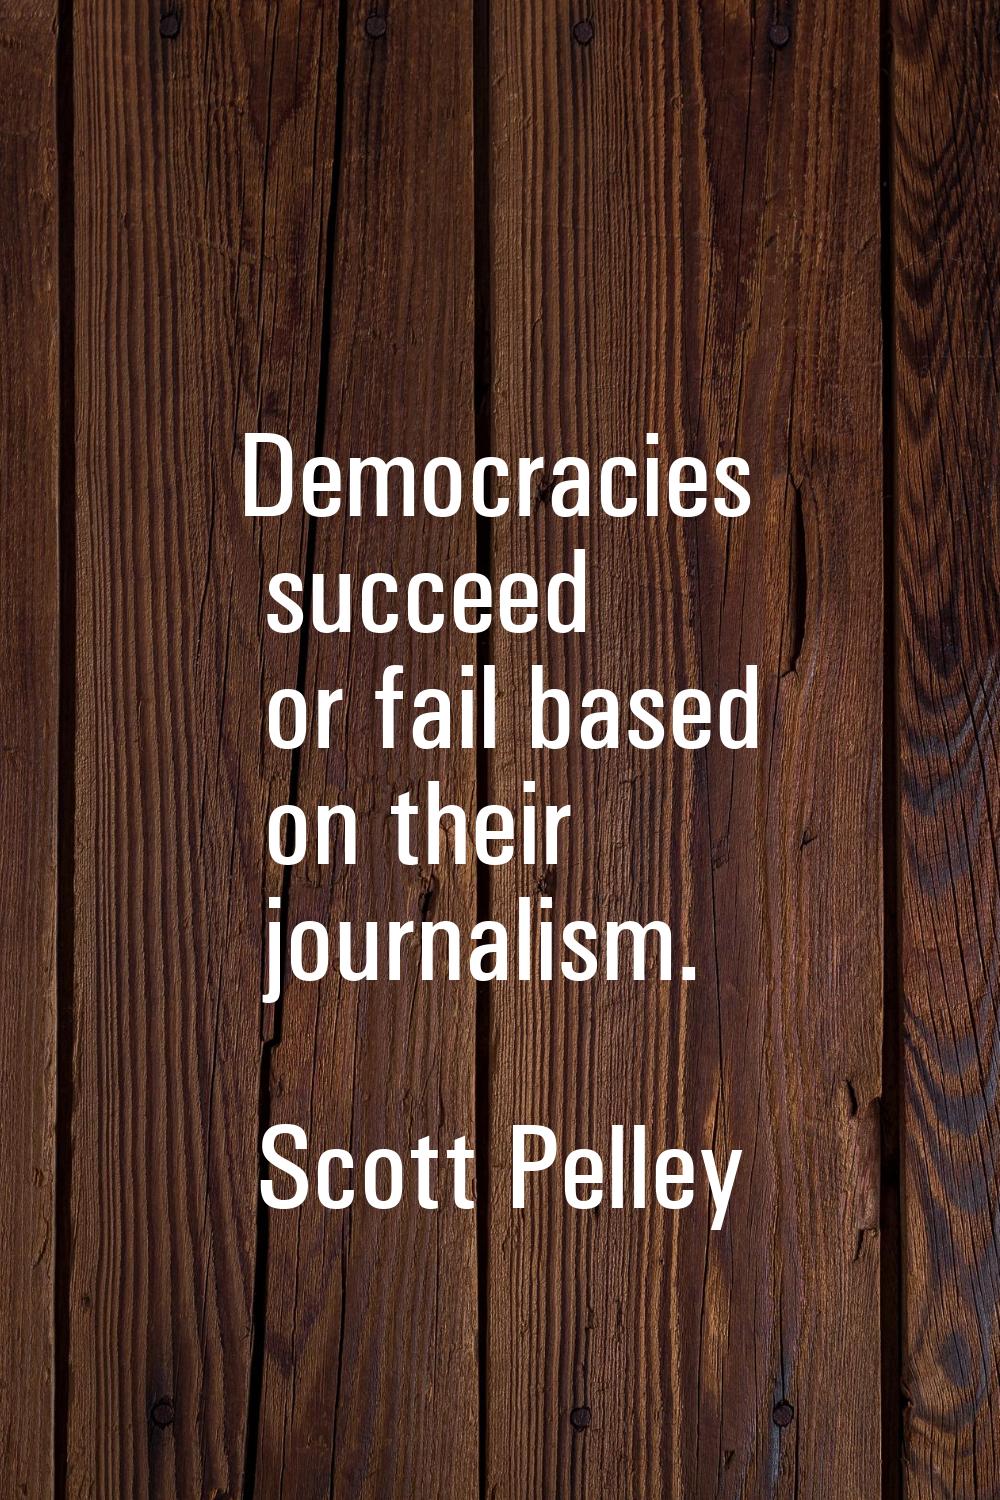 Democracies succeed or fail based on their journalism.